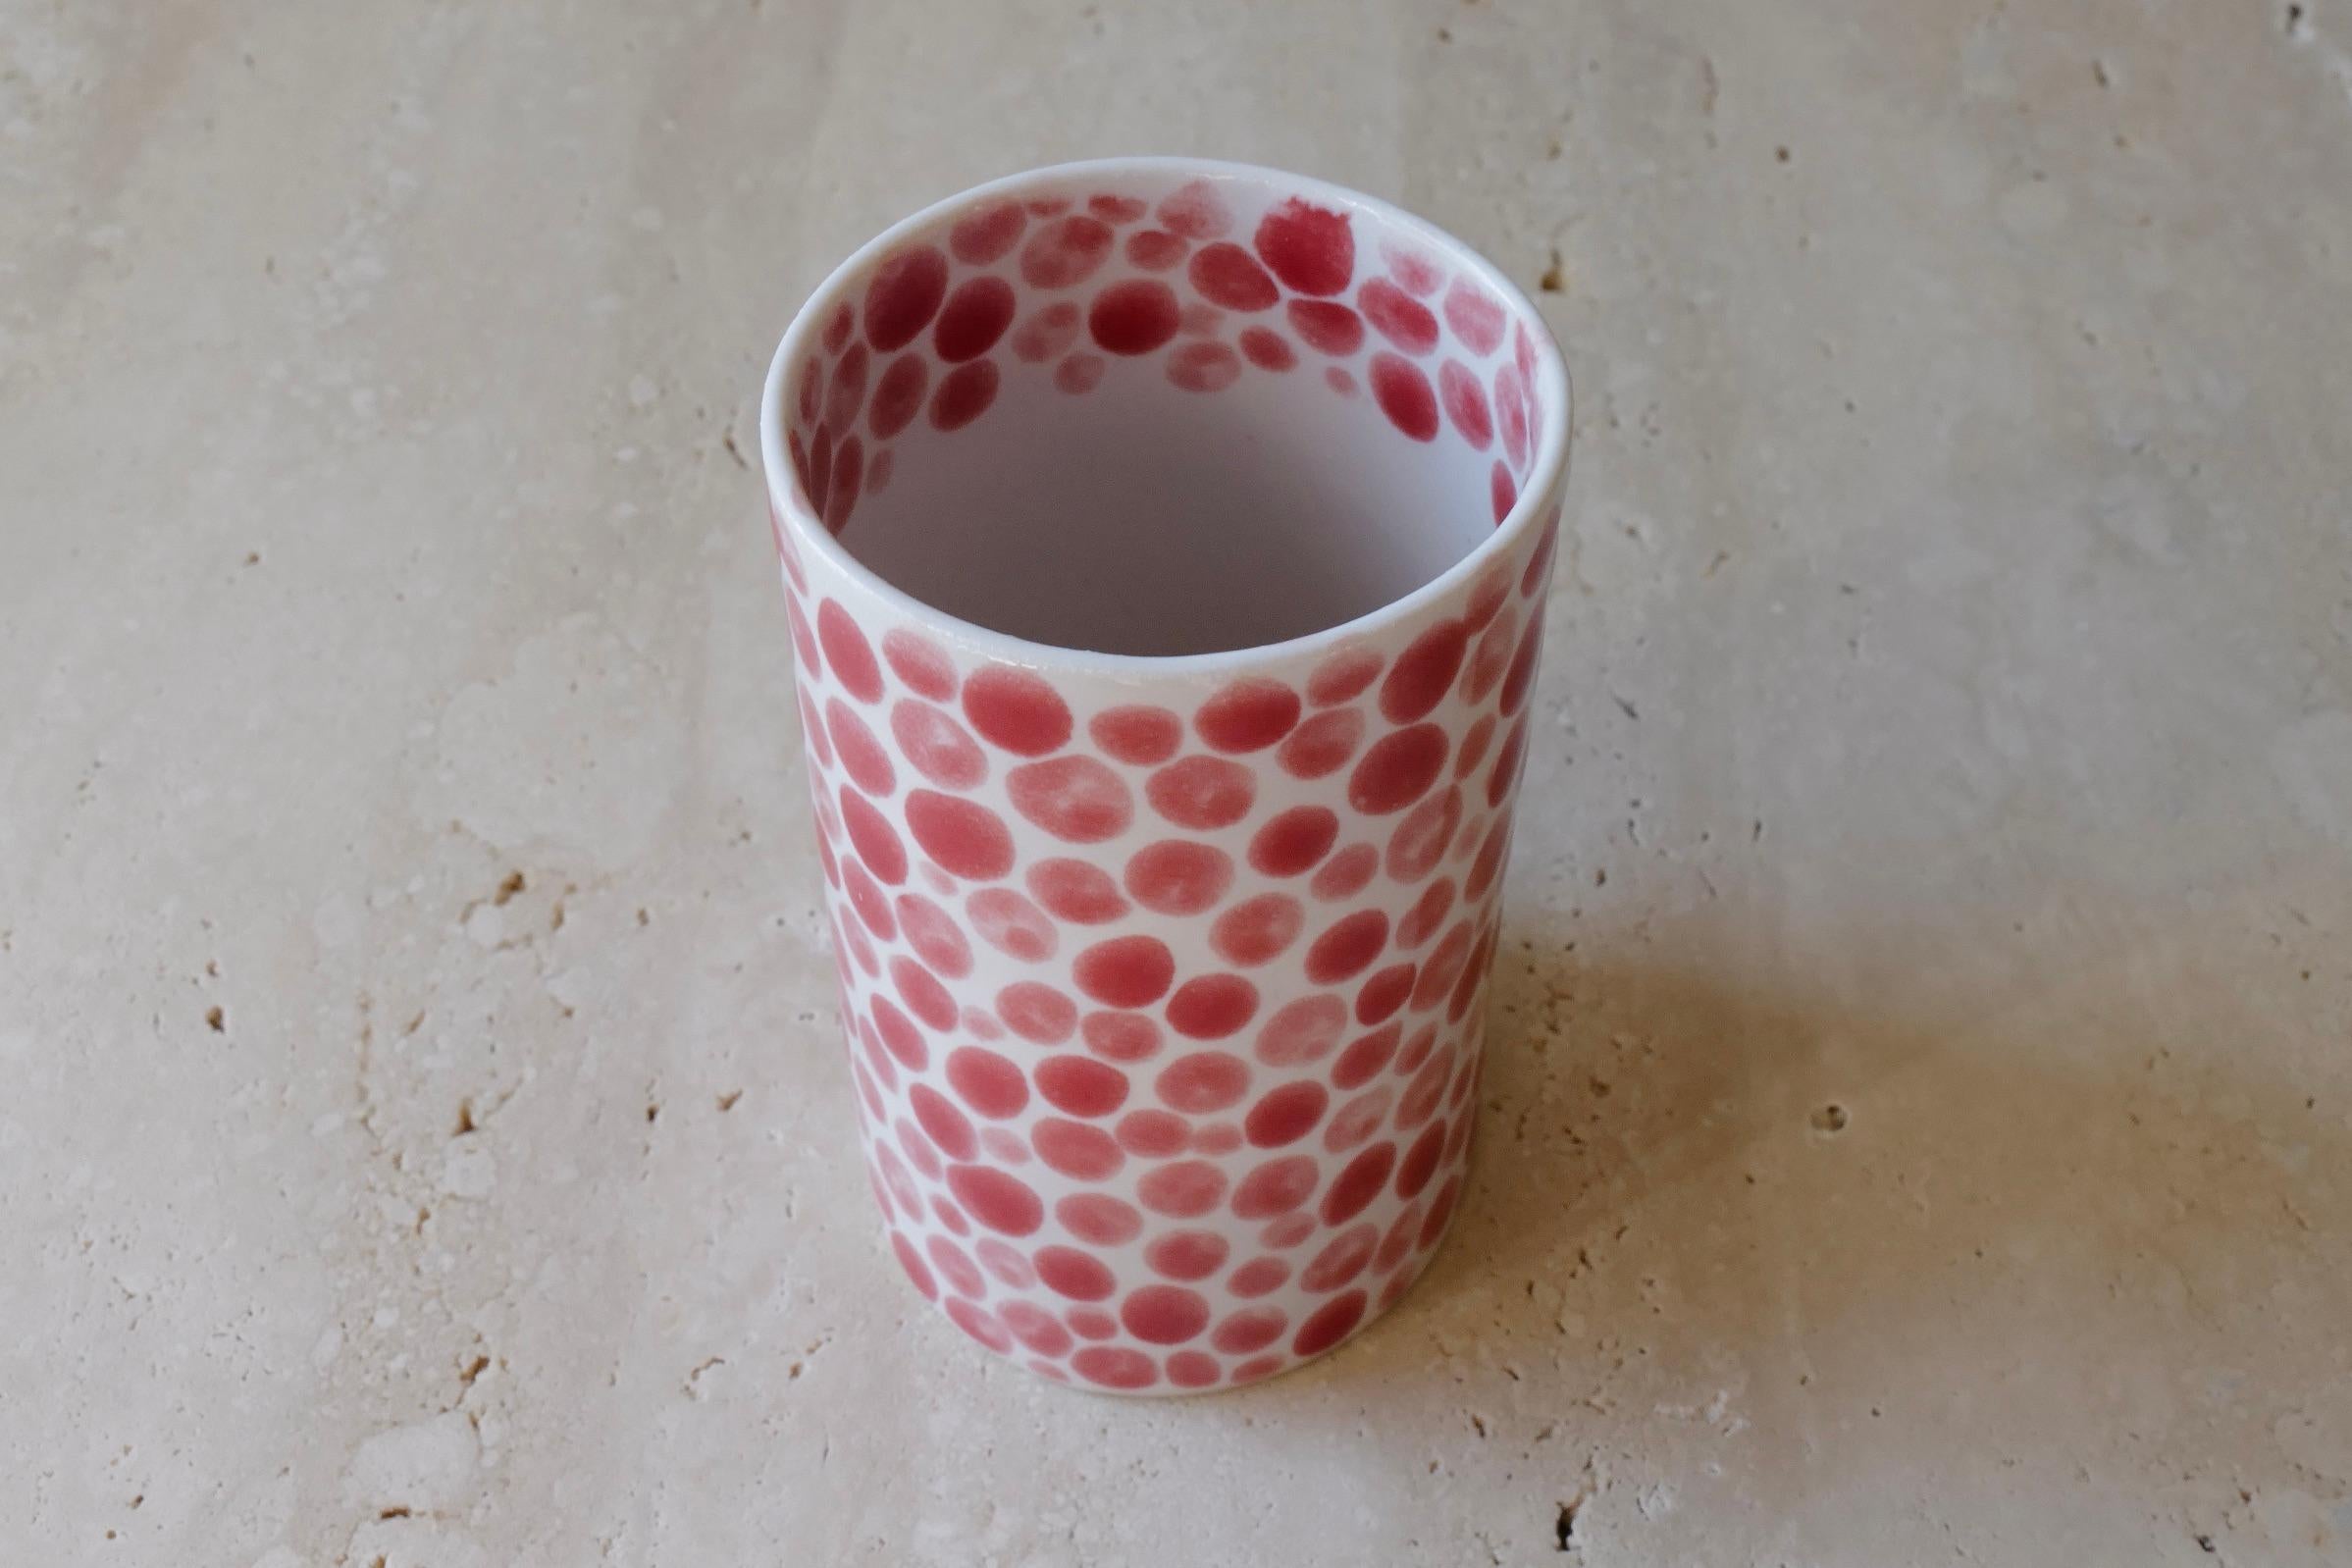 American Red Dots Porcelain Tall Cup by Lana Kova